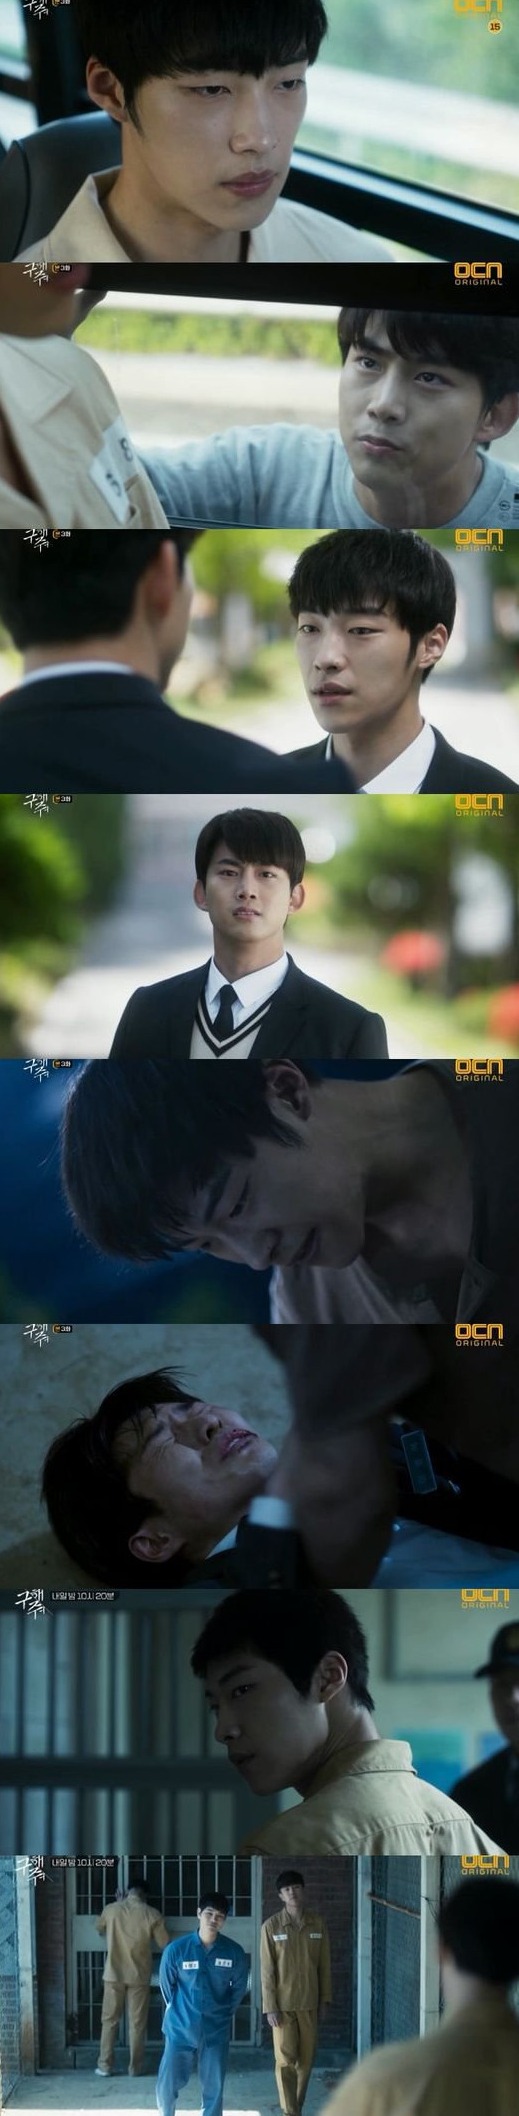 Spoiler Added Episodes 3 And 4 Captures For The Korean Drama Save Me Hancinema The